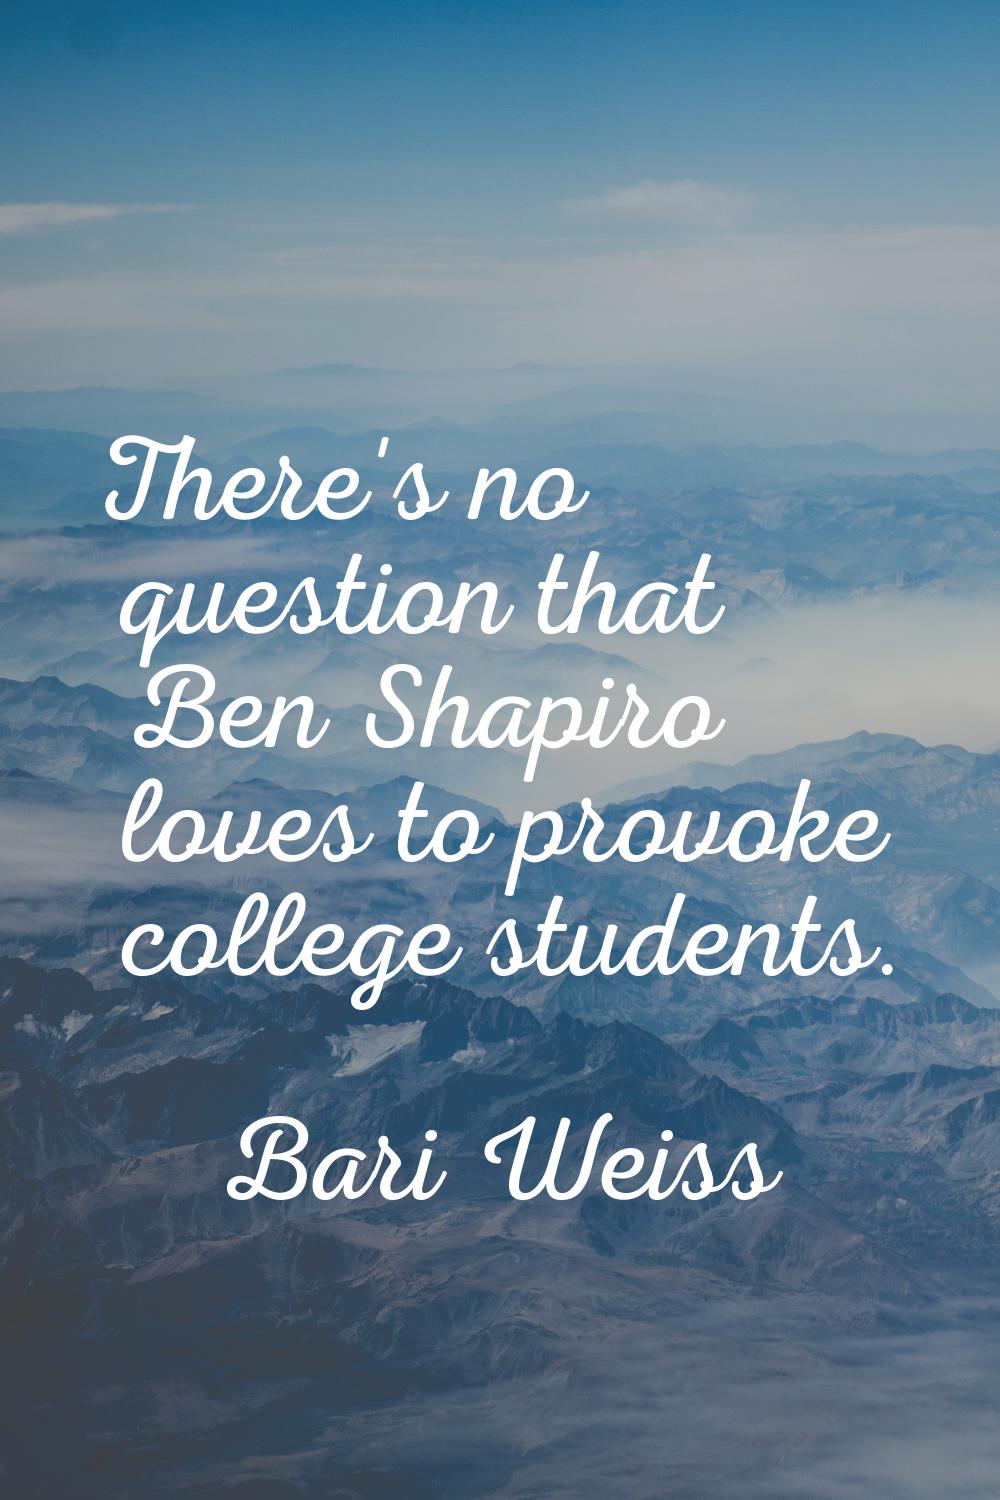 There's no question that Ben Shapiro loves to provoke college students.